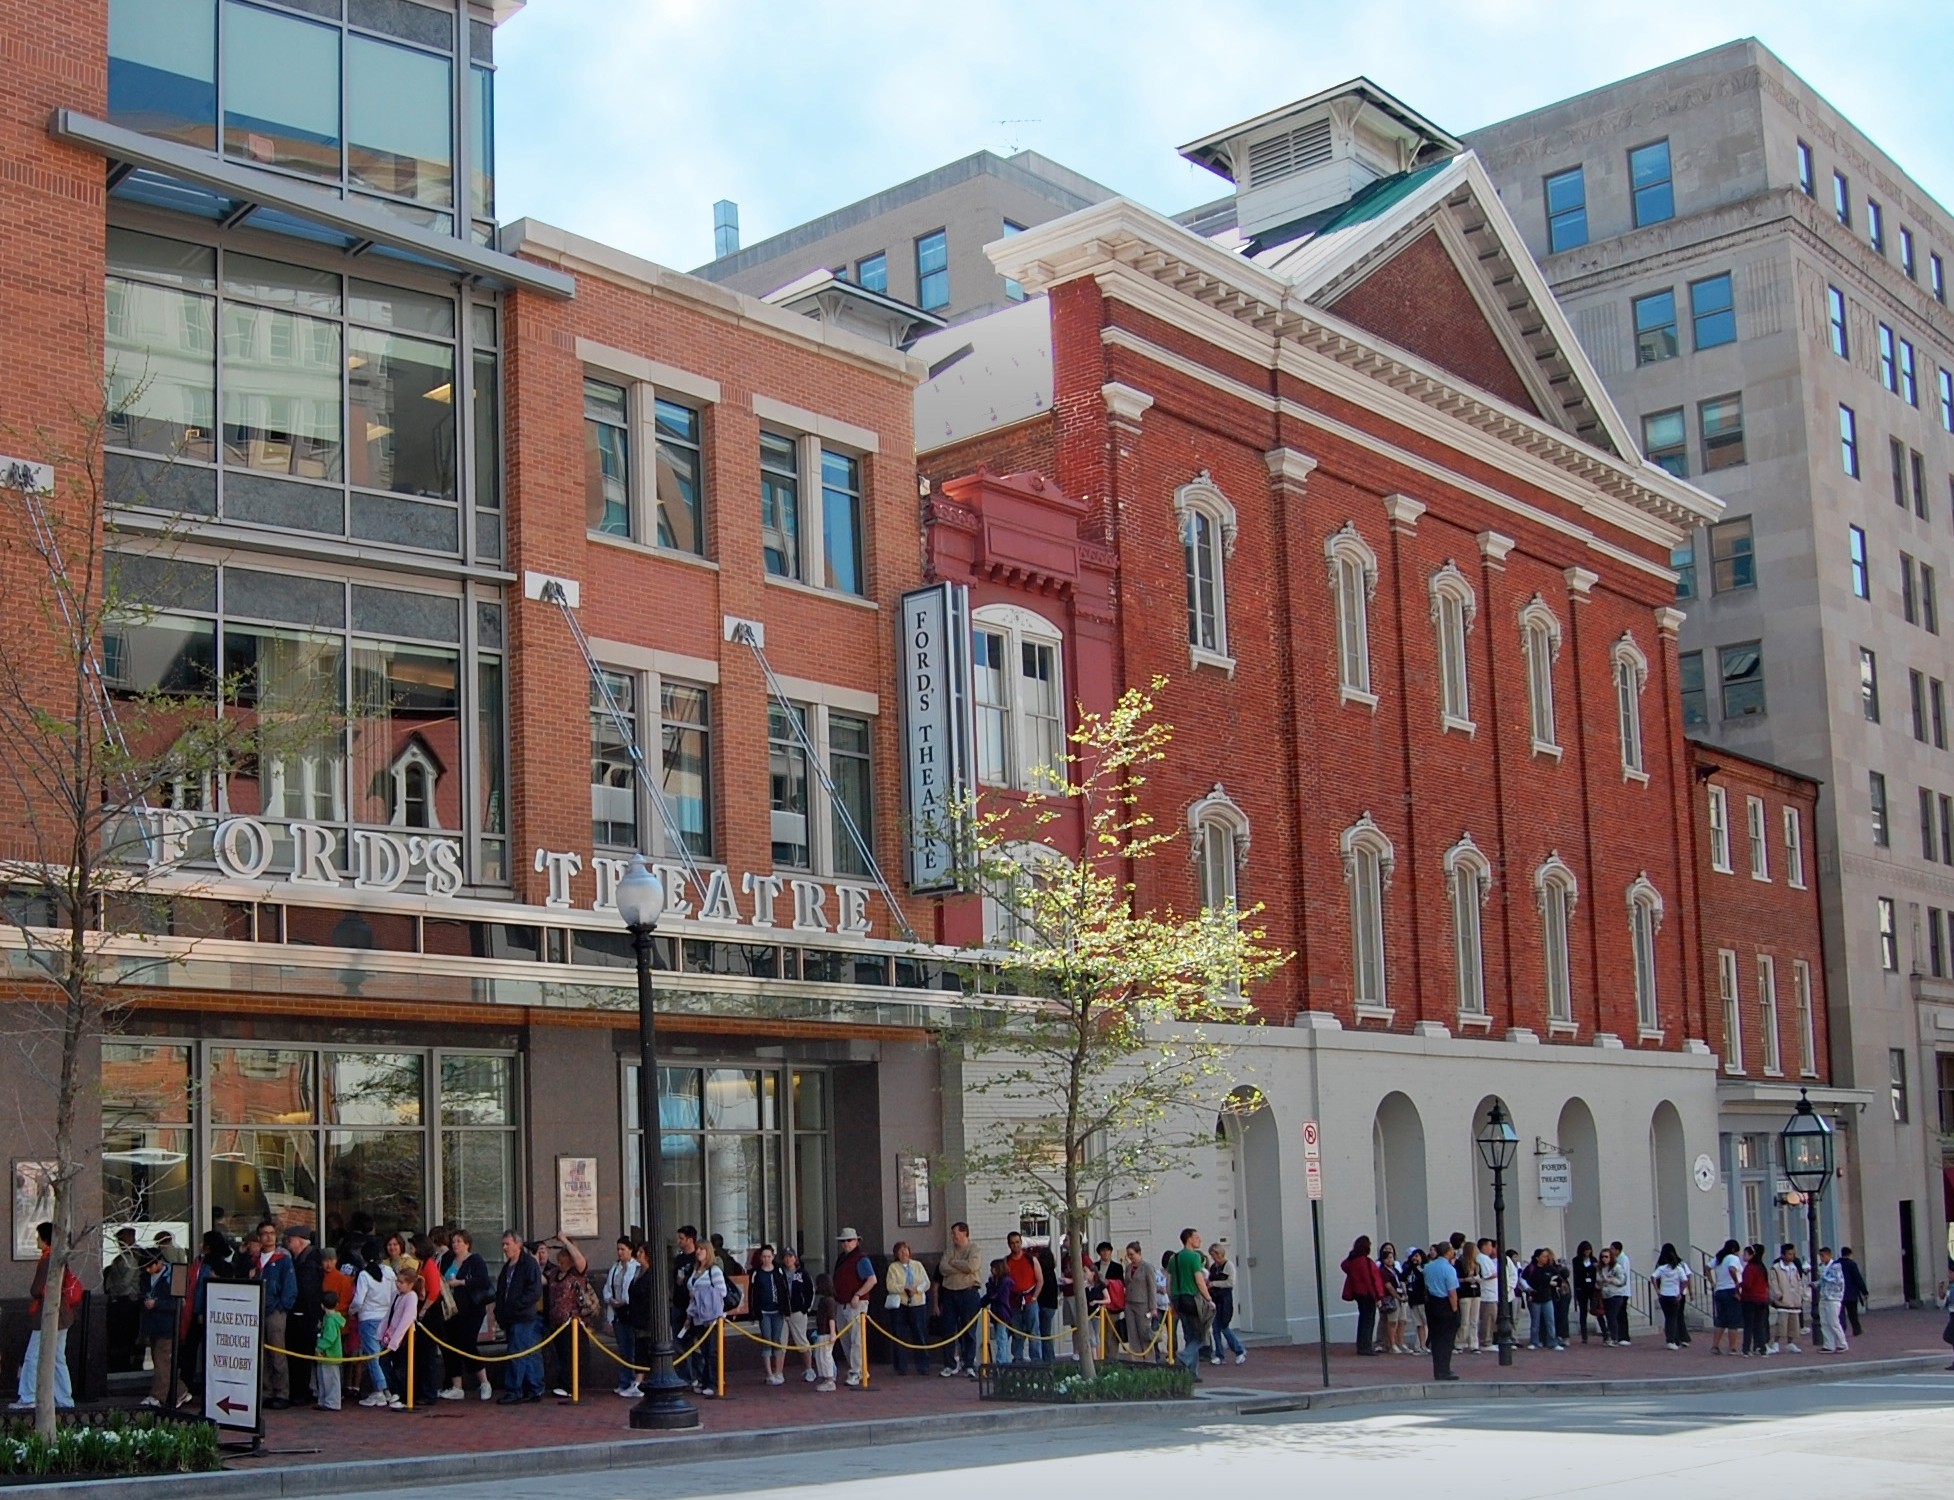 Street view of the exterior of Ford's Theatre on a sunny day.